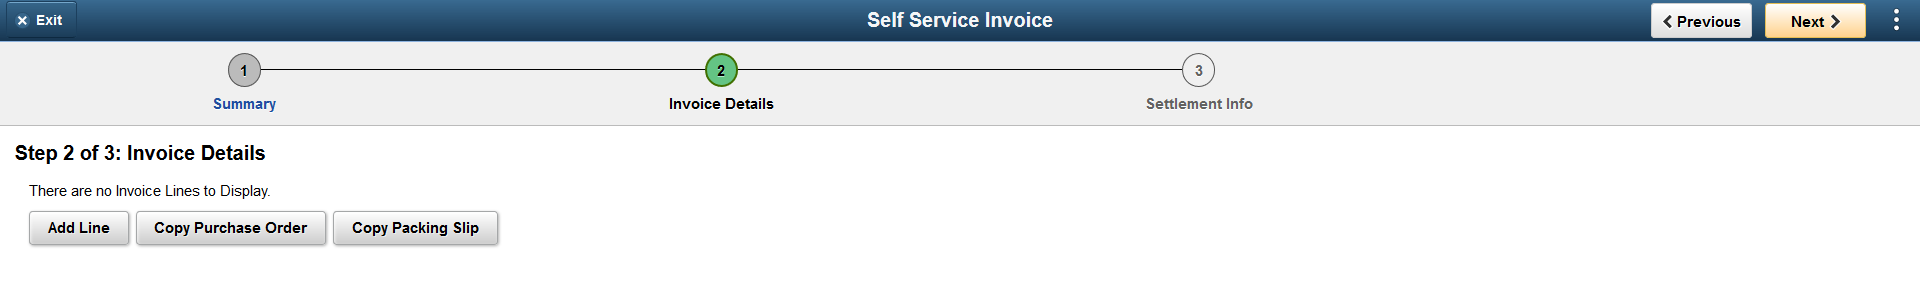 Self Service Invoice - Create Invoice page as displayed on a Desktop ( 2 of 3)